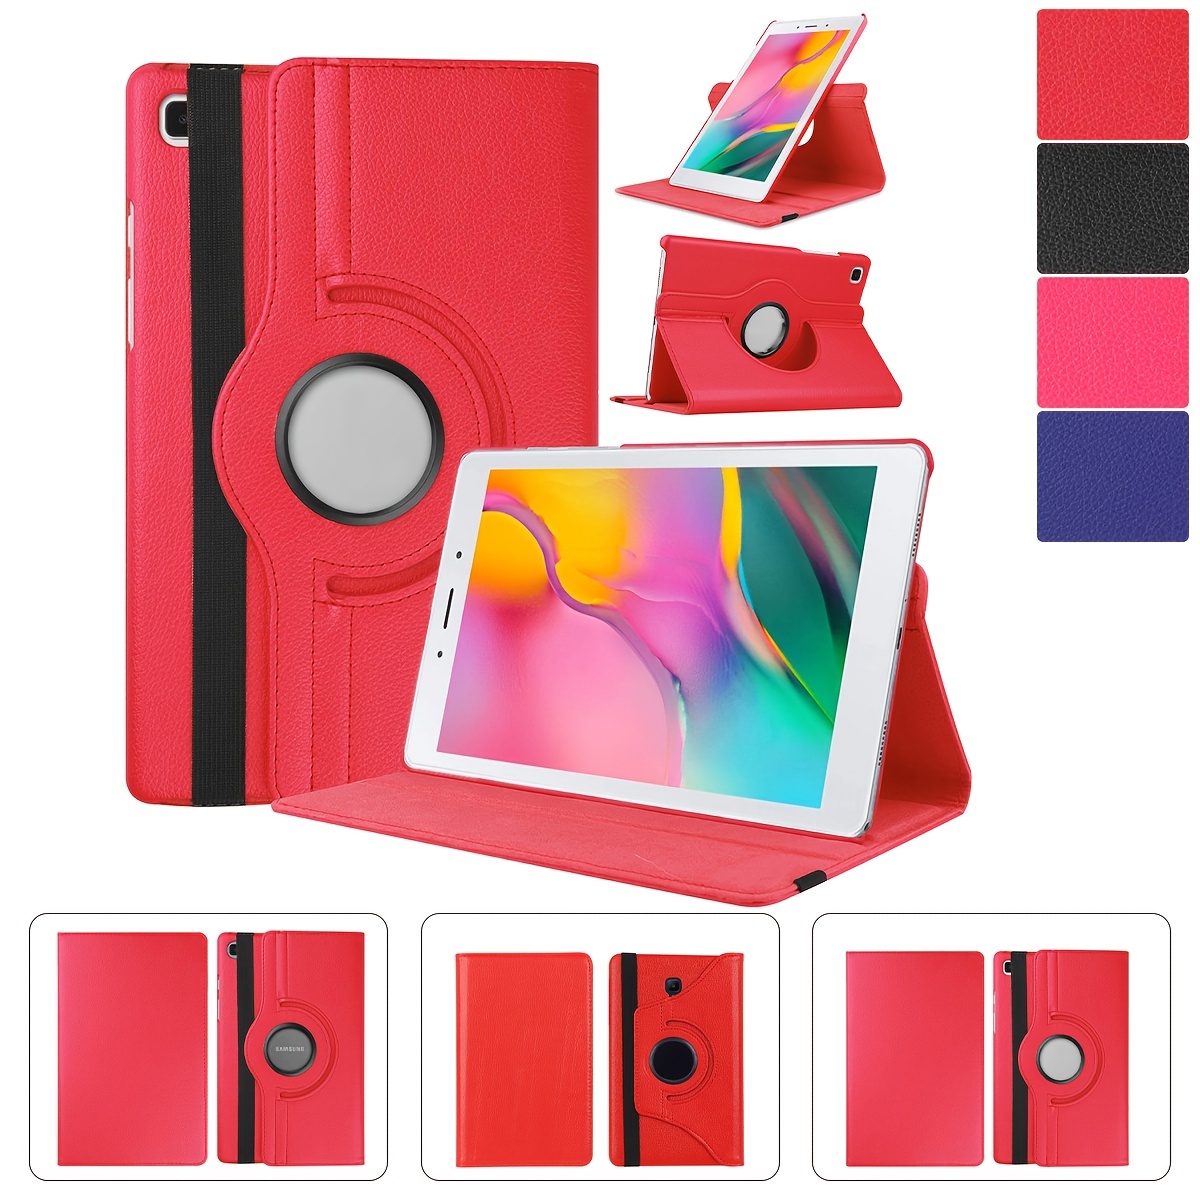 

Suitable For Samsung Galaxy Tab A 10.1 2019 ( Sm-t510/515) Rotating 360 Degree Protective Cover, Multi-angle Support Pu Faux Leather Protective Case. Drop Proof Thickened